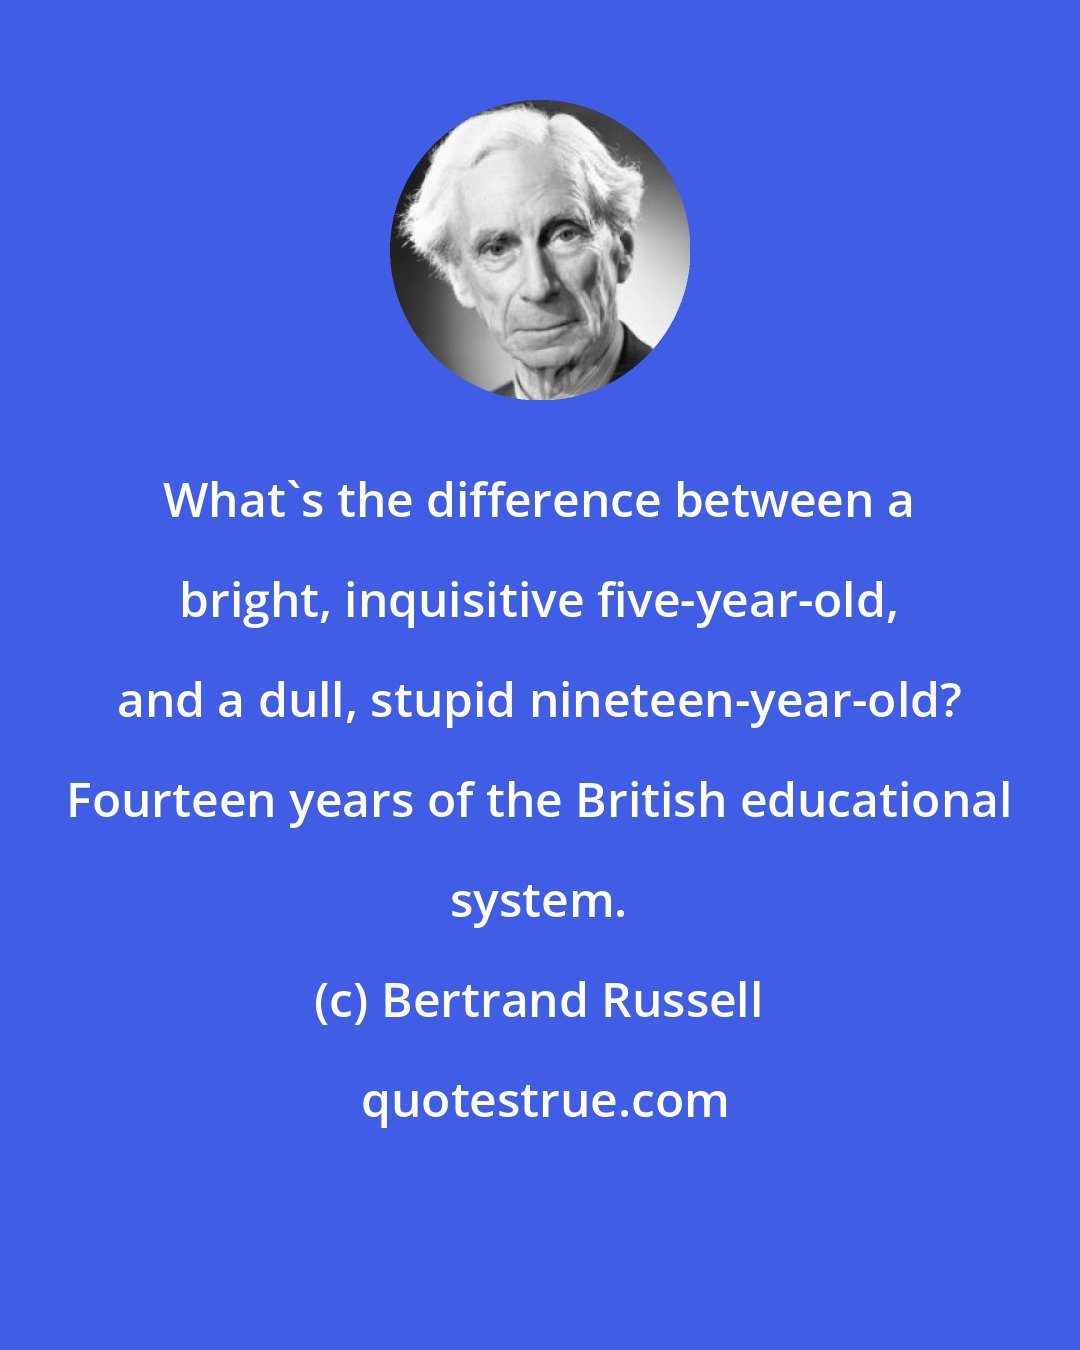 Bertrand Russell: What's the difference between a bright, inquisitive five-year-old, and a dull, stupid nineteen-year-old? Fourteen years of the British educational system.